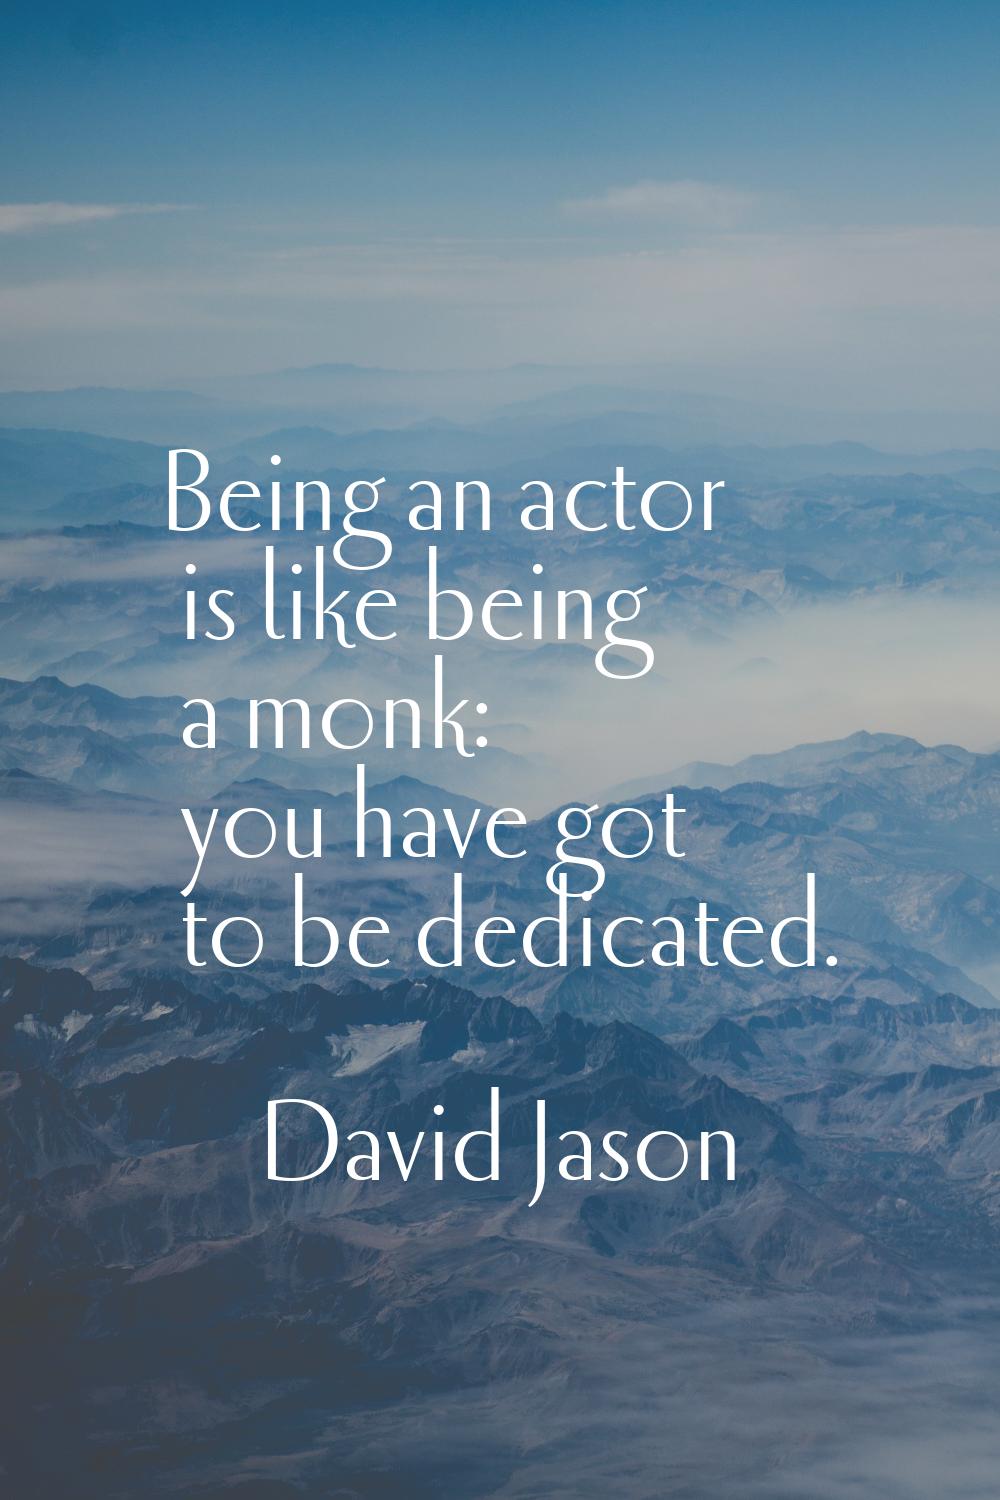 Being an actor is like being a monk: you have got to be dedicated.